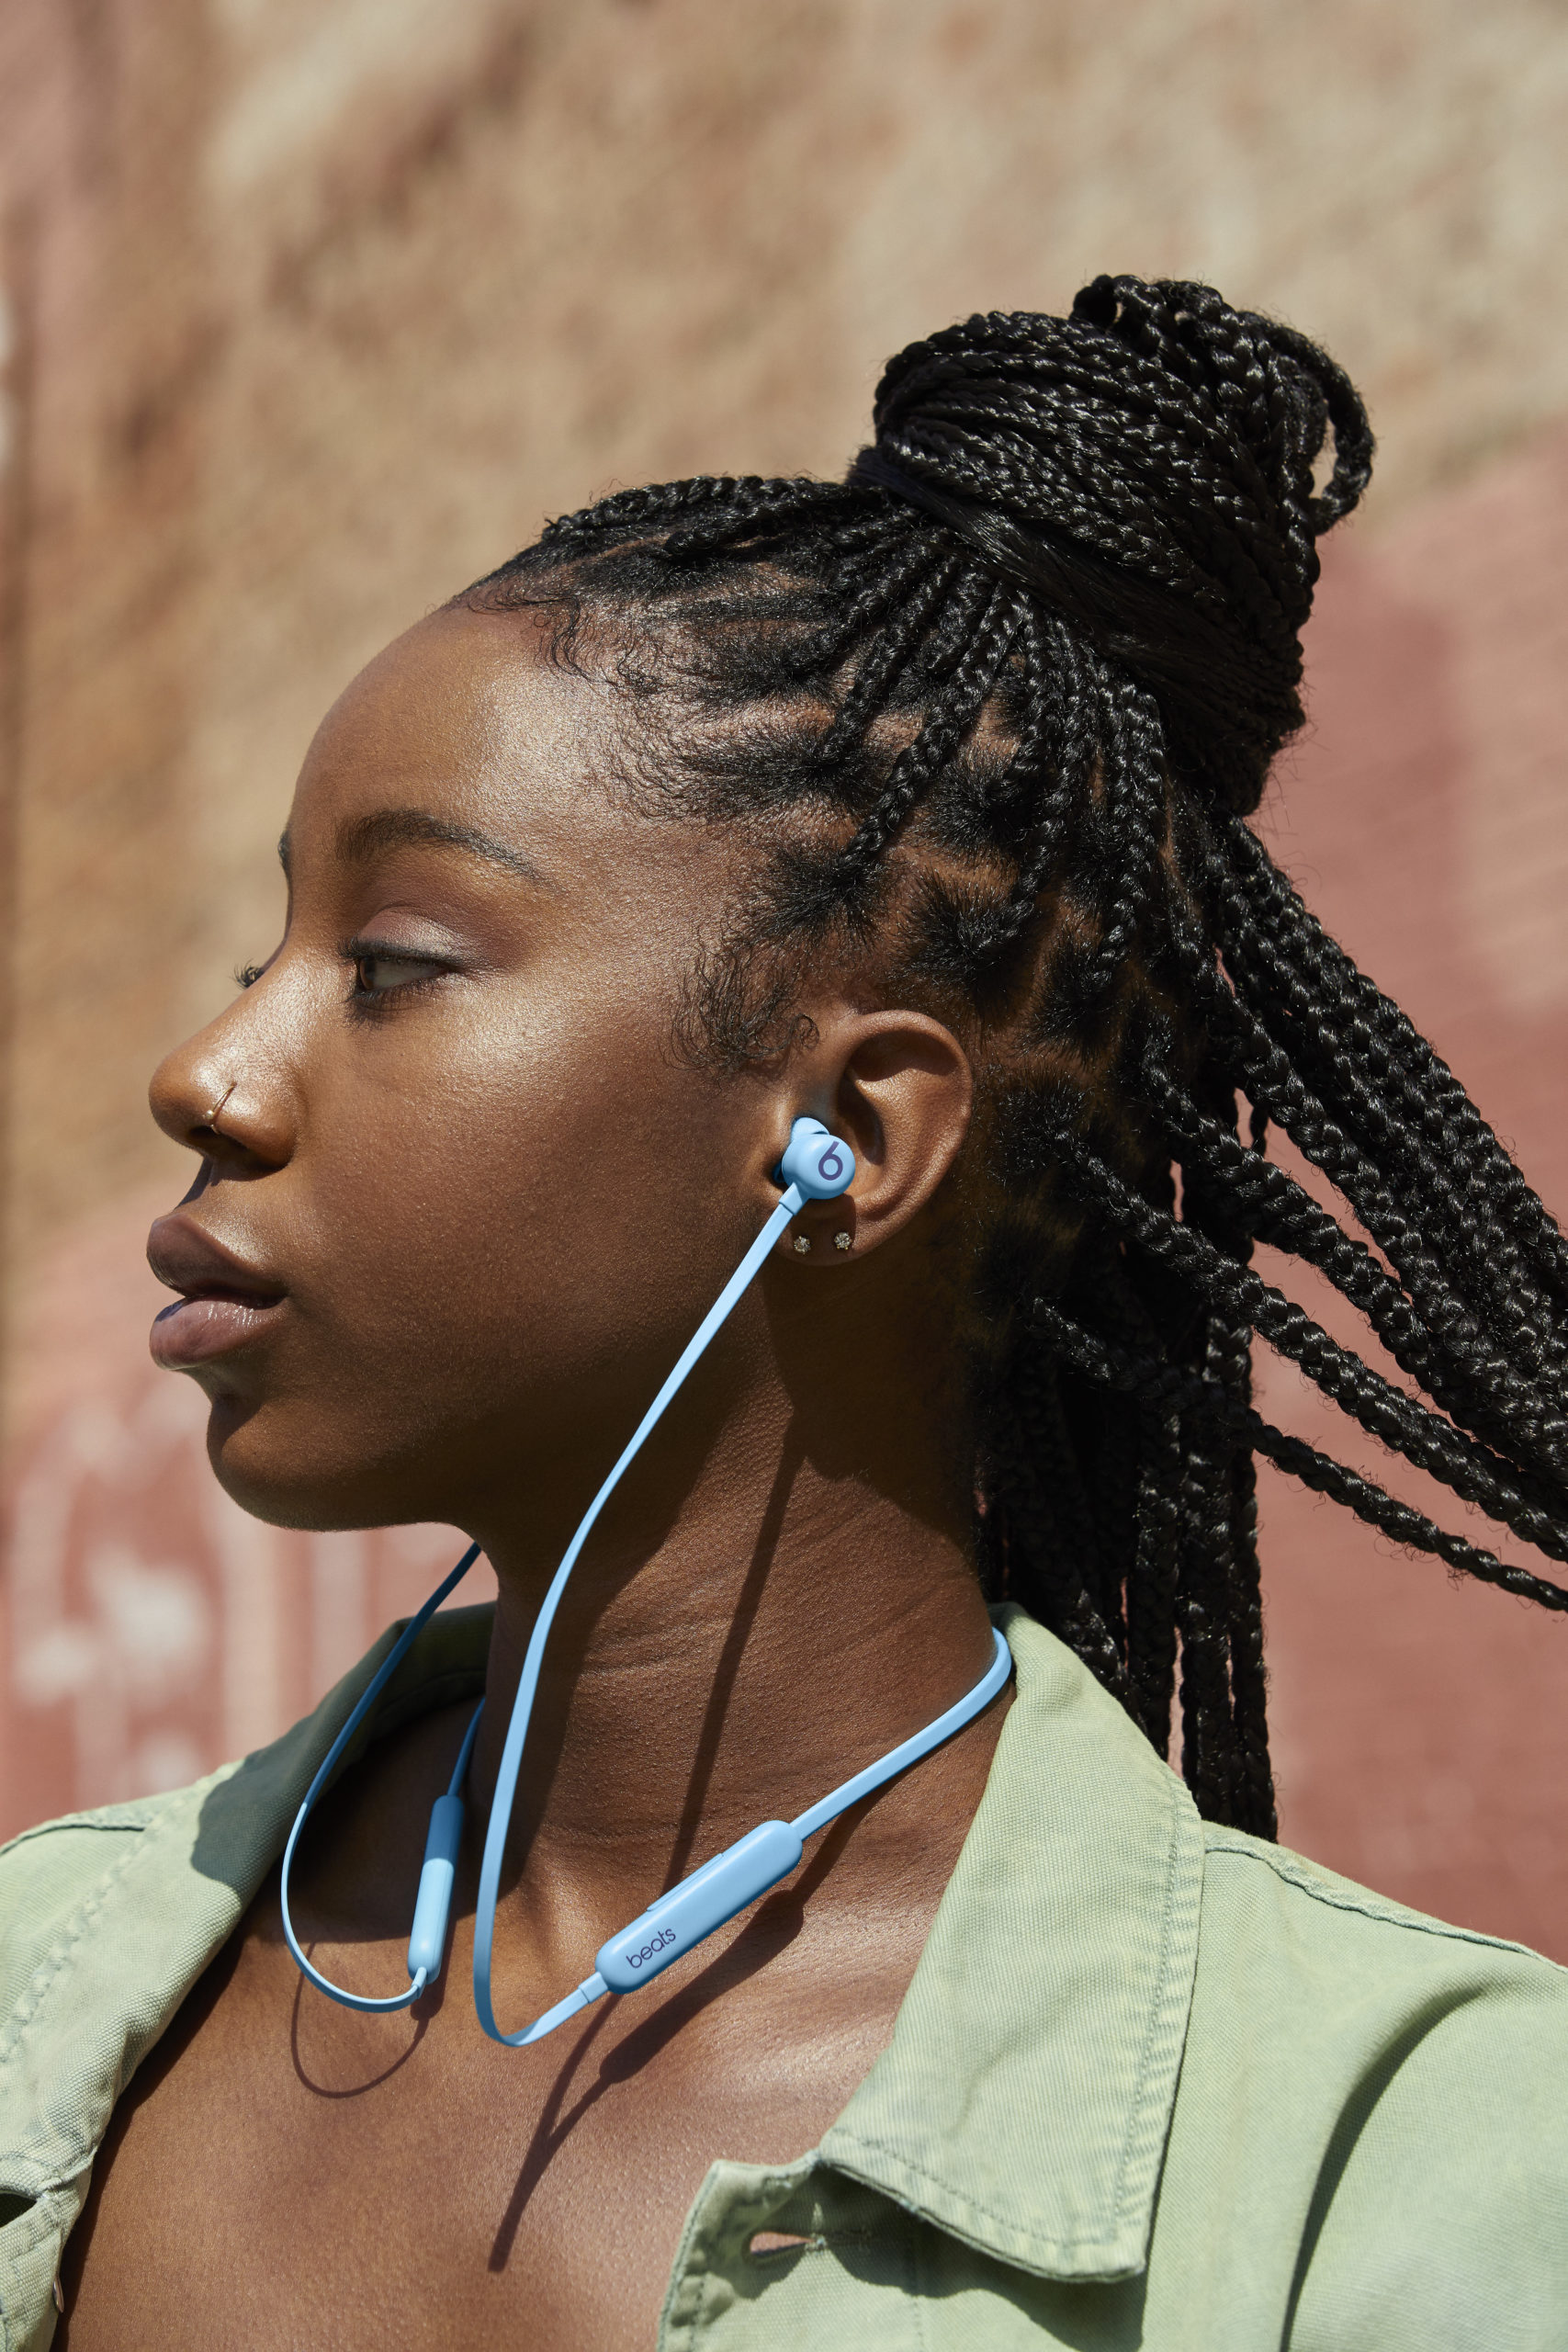 Beats Flex Debuts Their Most Affordable Premium Wireless Earphones in new colours; Smoke Grey and Flame Blue [@beatsbydre]